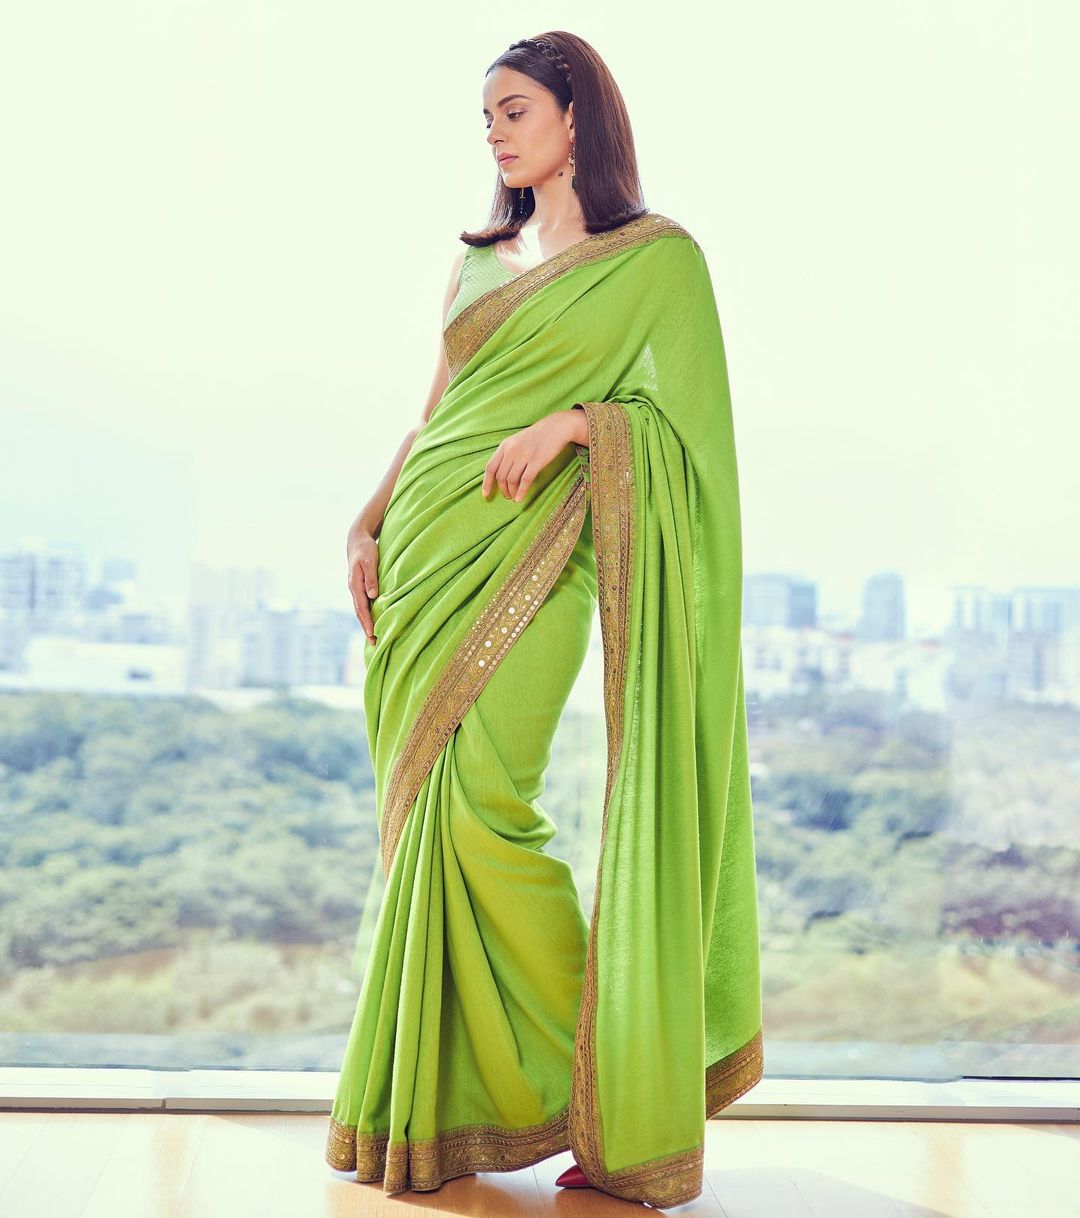 Kangana Ranaut is elegance personified in the green saree.